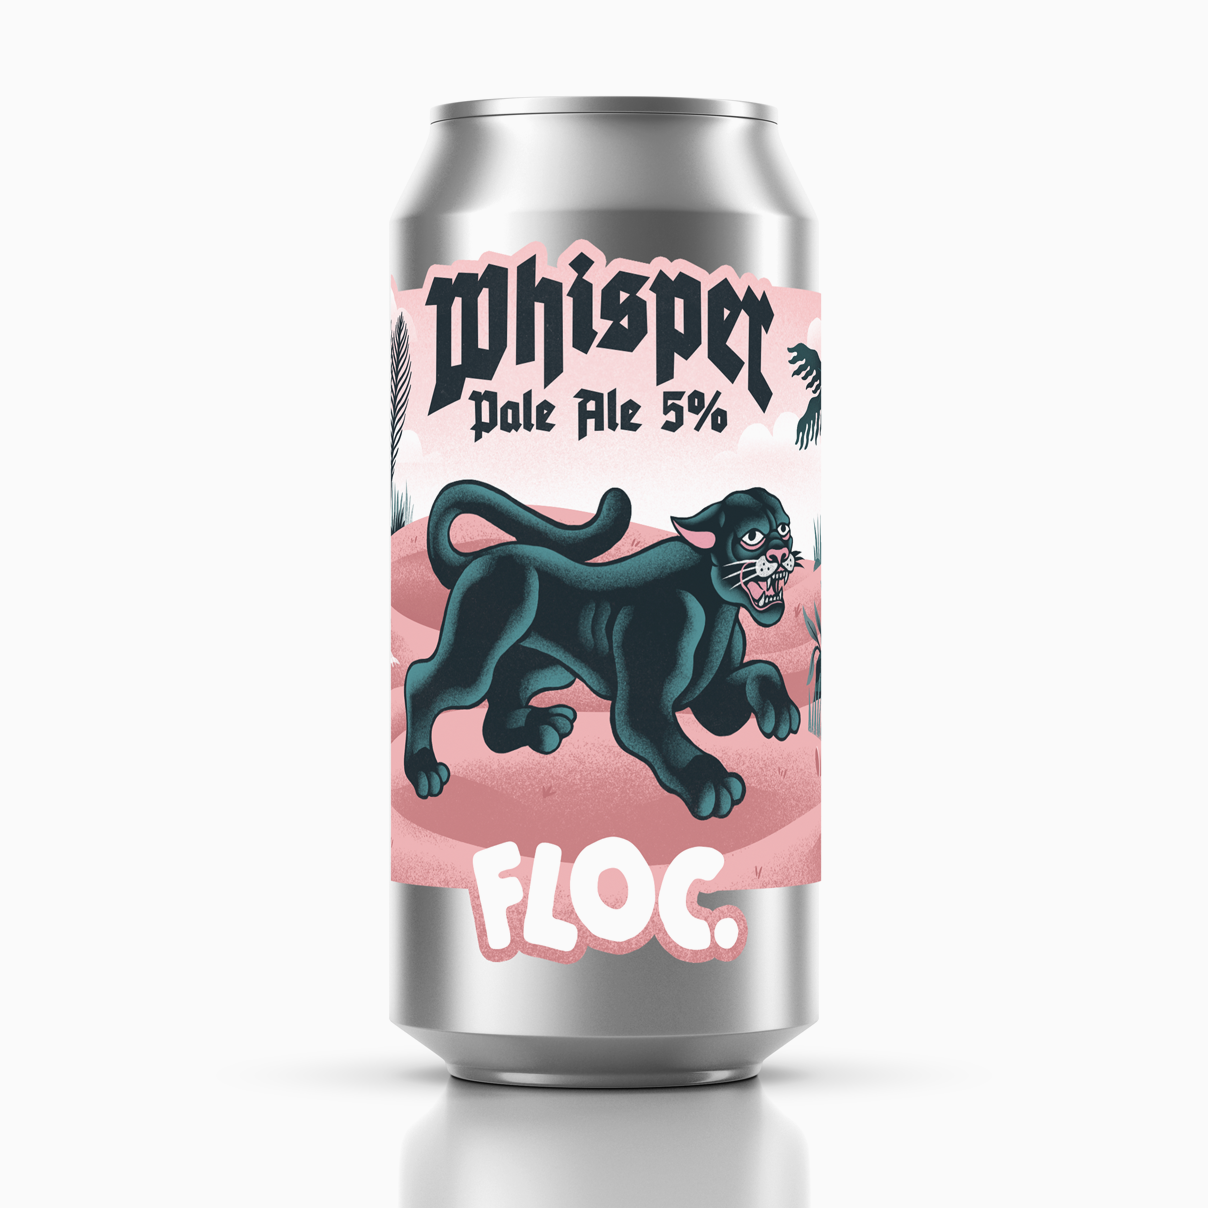 Whisper - 5% PALE ALE - 440ml can